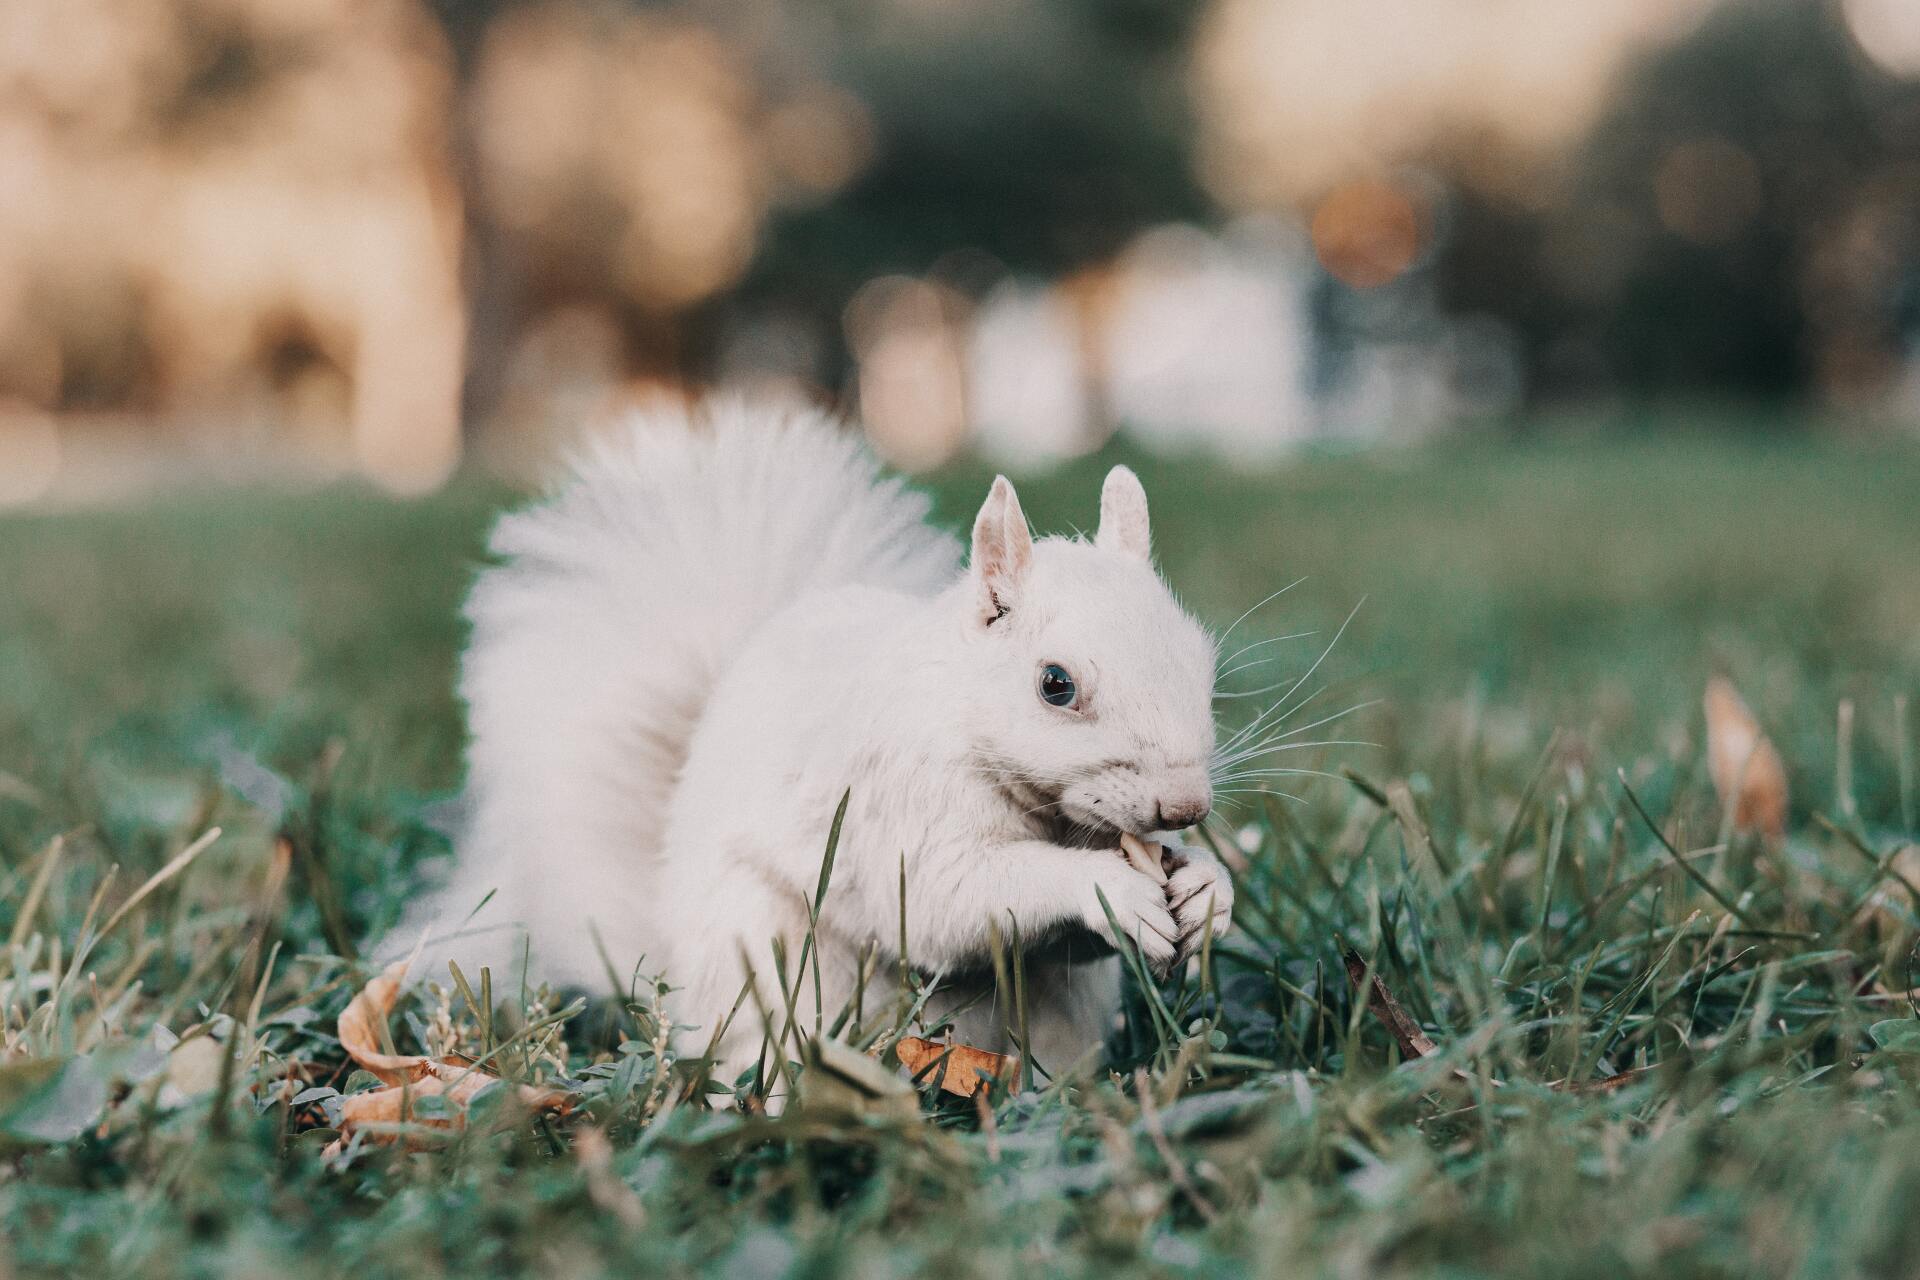 a white squirrel is eating a nut in the grass .